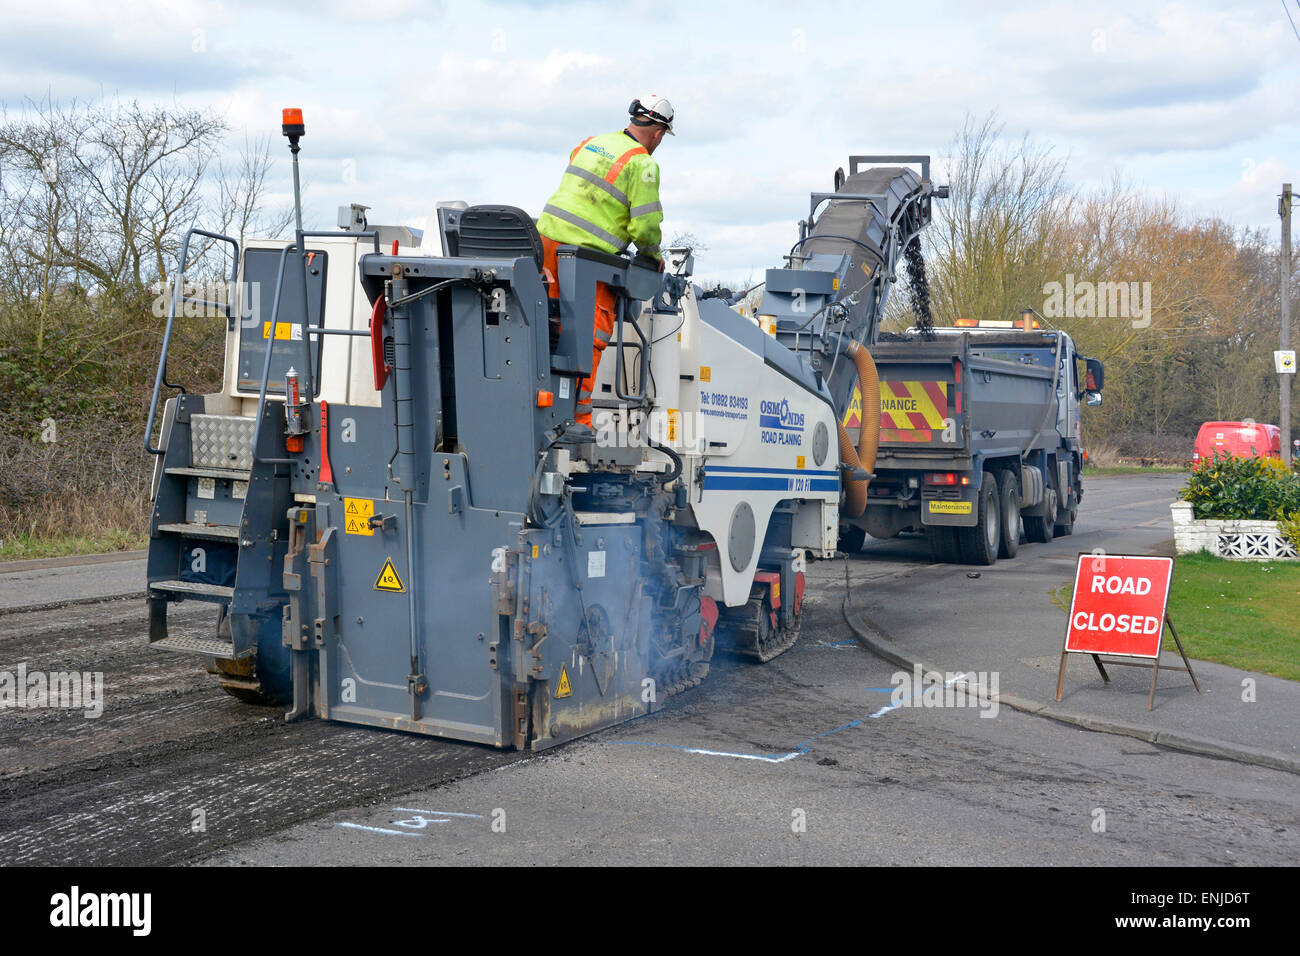 Defective worn asphalt road being planed off in preparation for resurfacing tipper truck lorry loading waste for recycling Brentwood Essex England Stock Photo